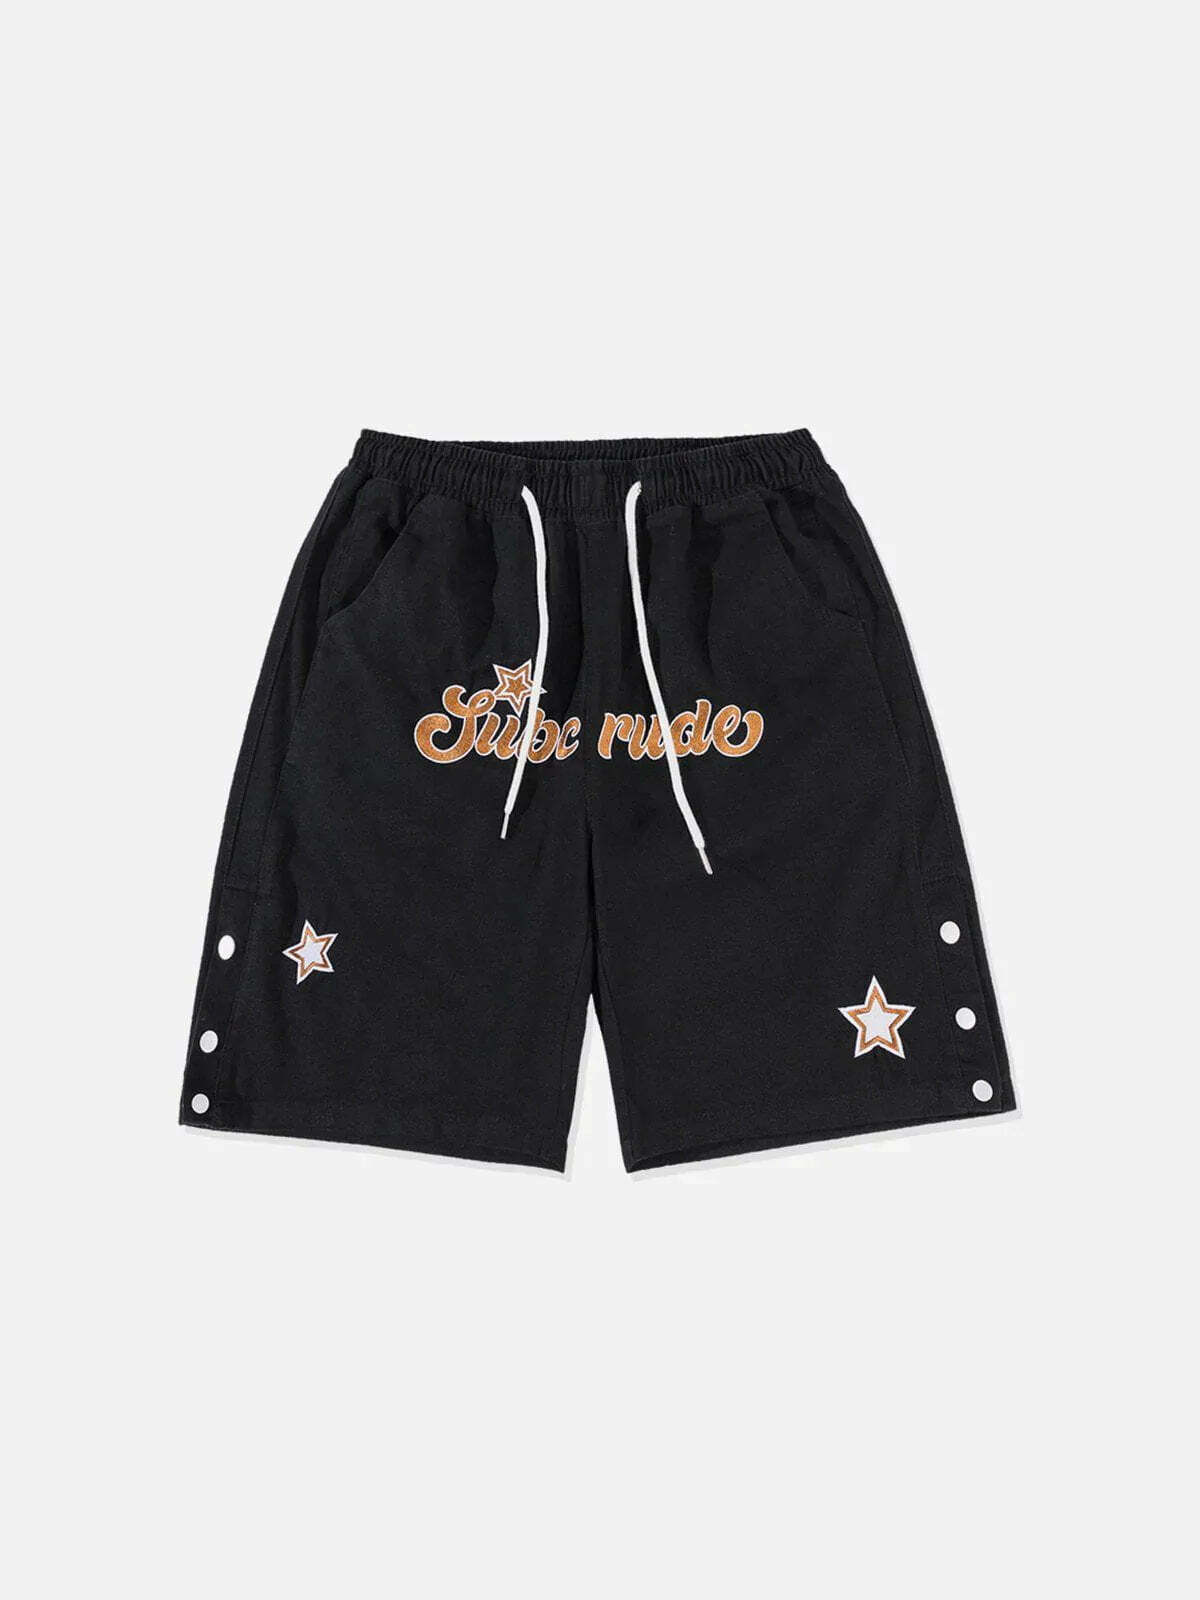 embroidered letter drawstring shorts edgy urban fashion essential 1003